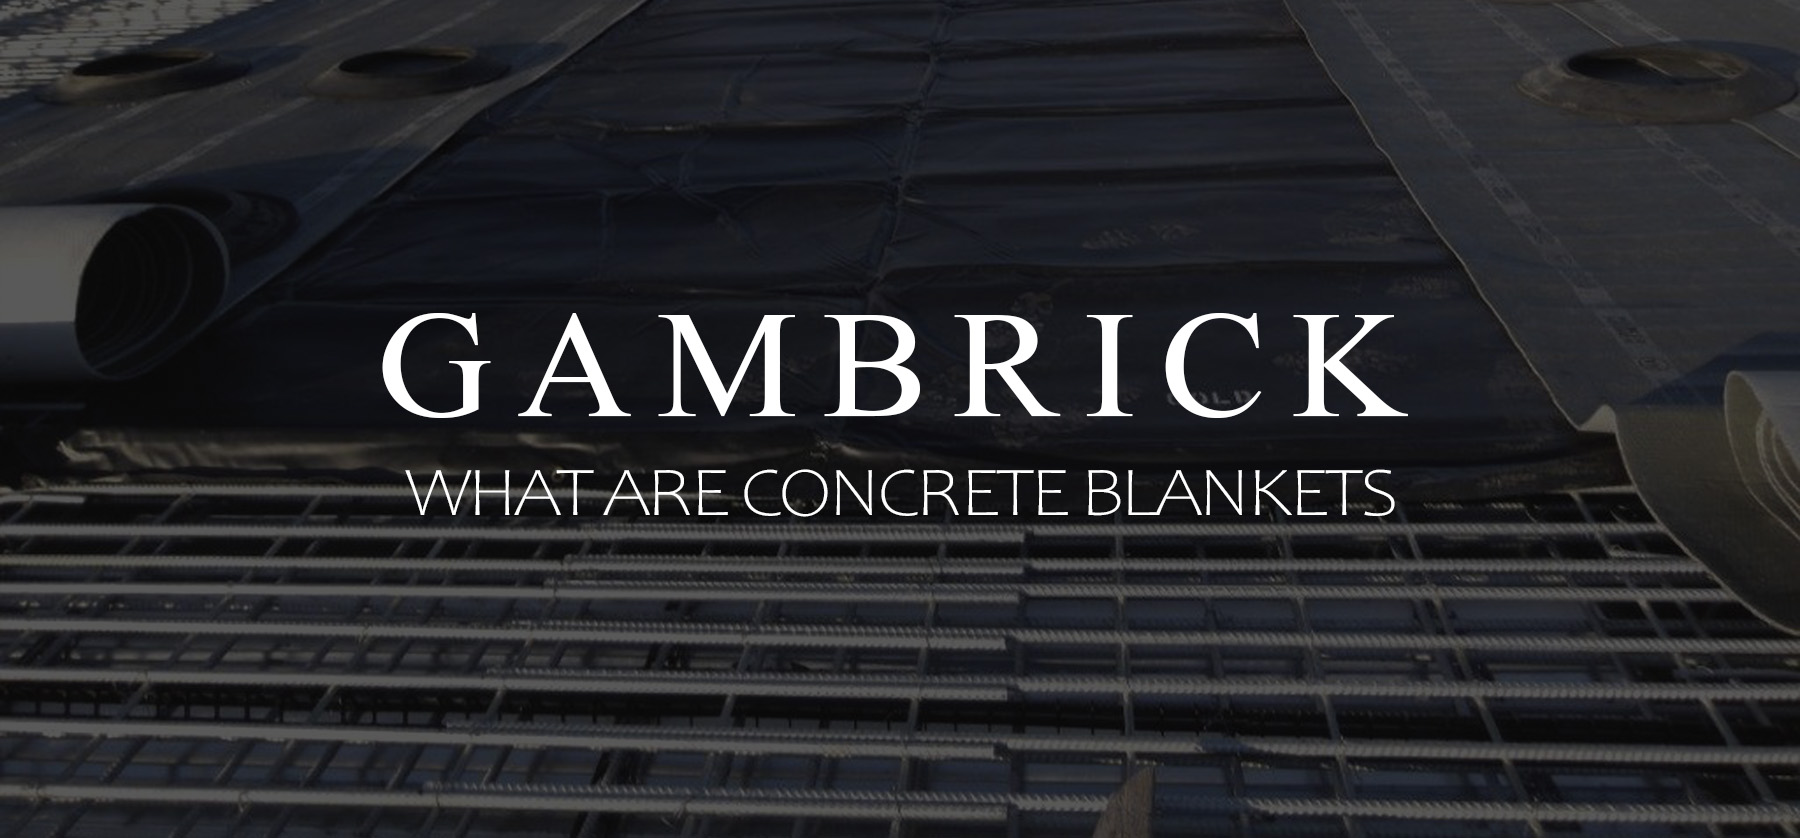 what are concrete blankets banner pic